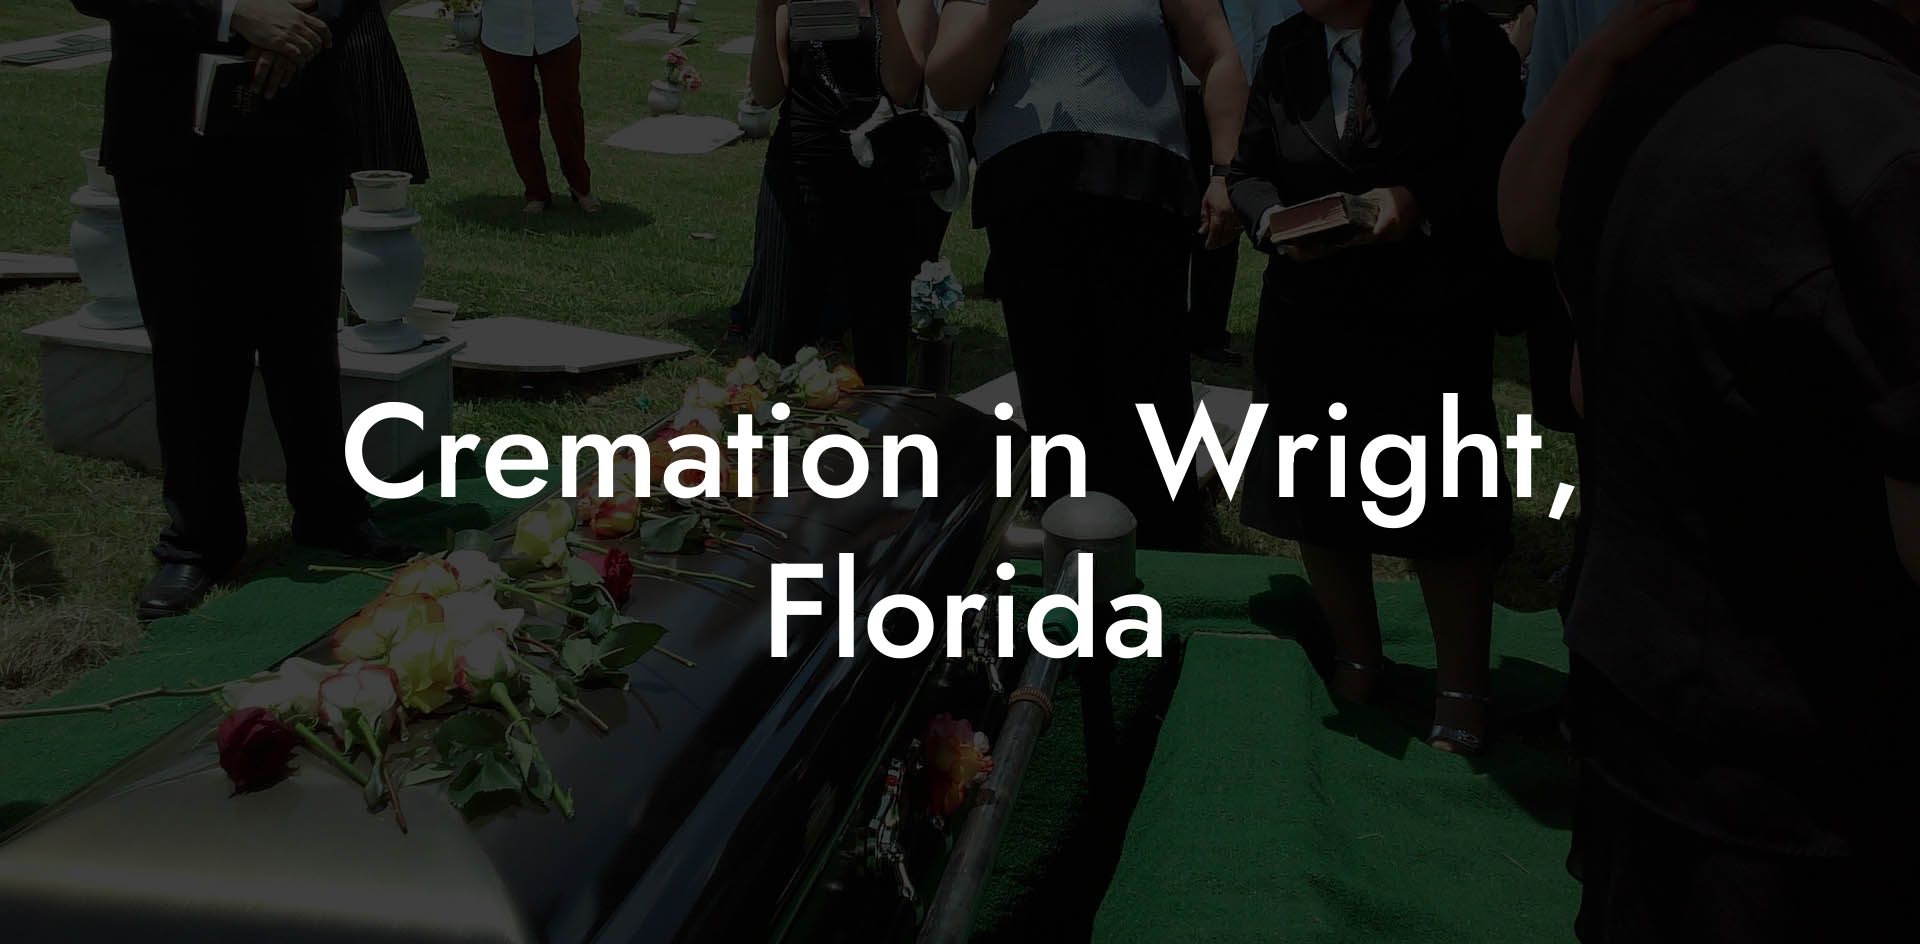 Cremation in Wright, Florida